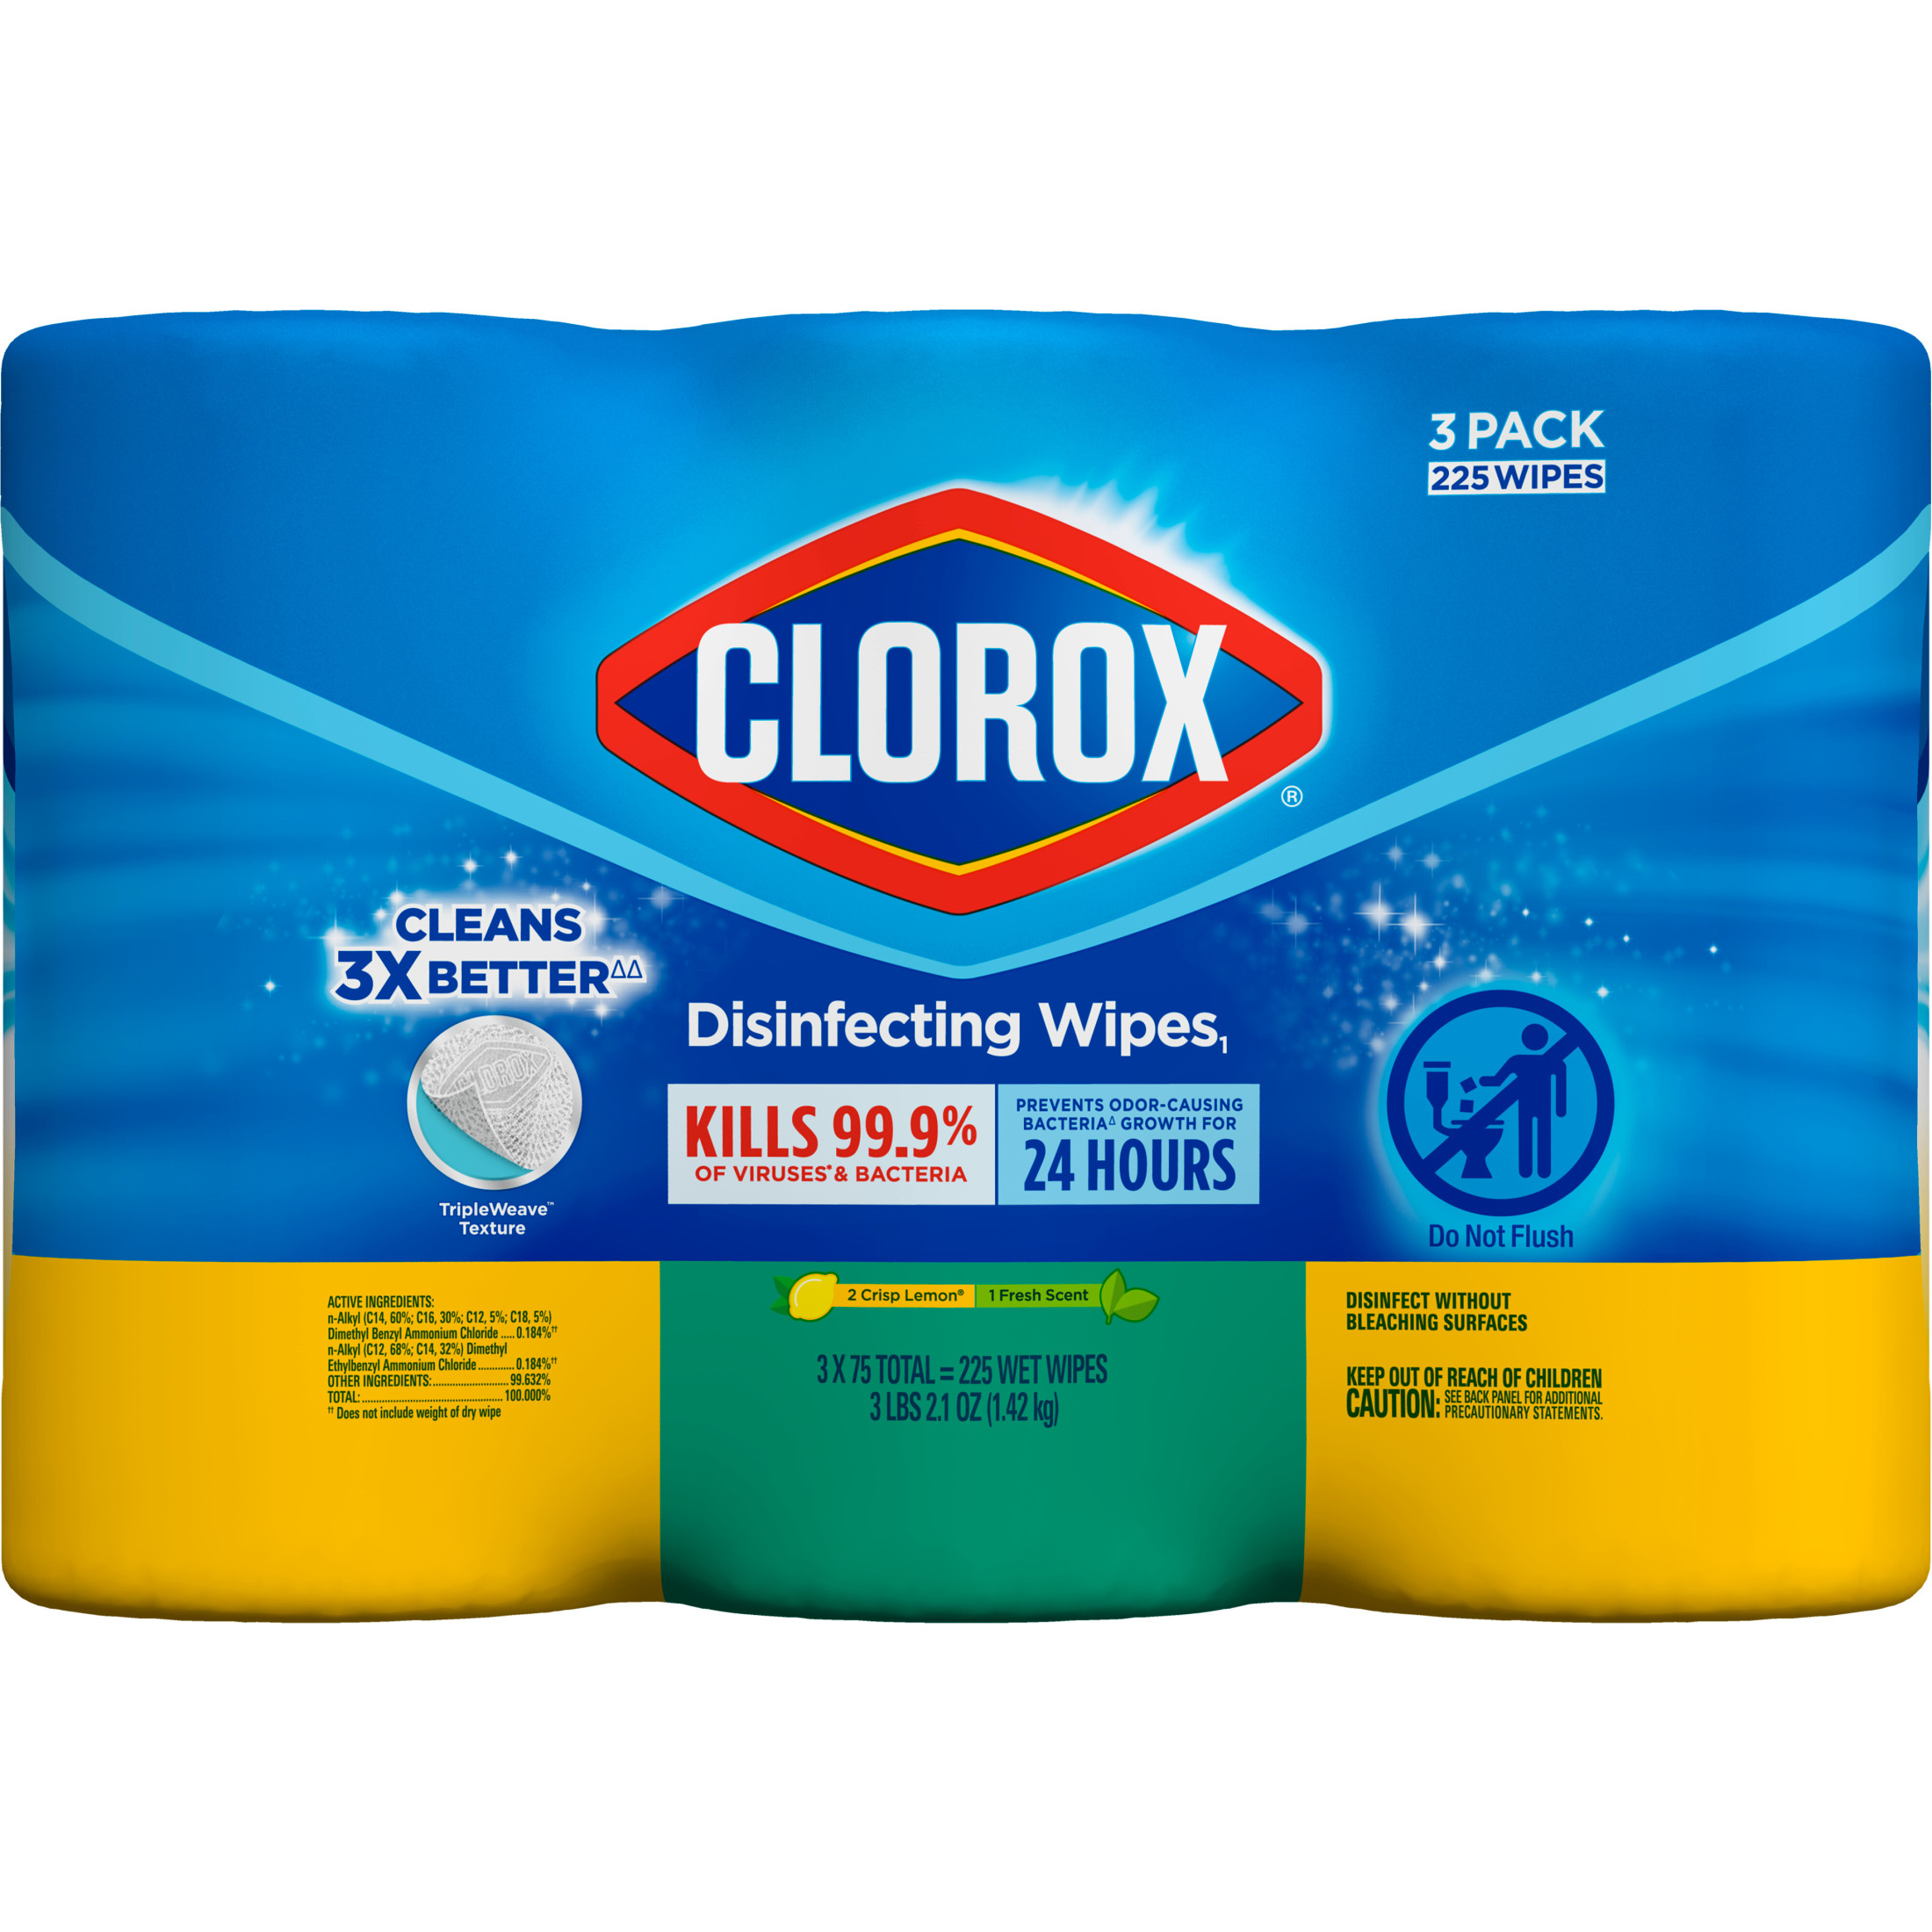 Clorox Disinfecting Wipes, (225 Count Value Pack), Crisp Lemon and Fresh Scent - 3 Pack - 75 Count Each - image 3 of 10